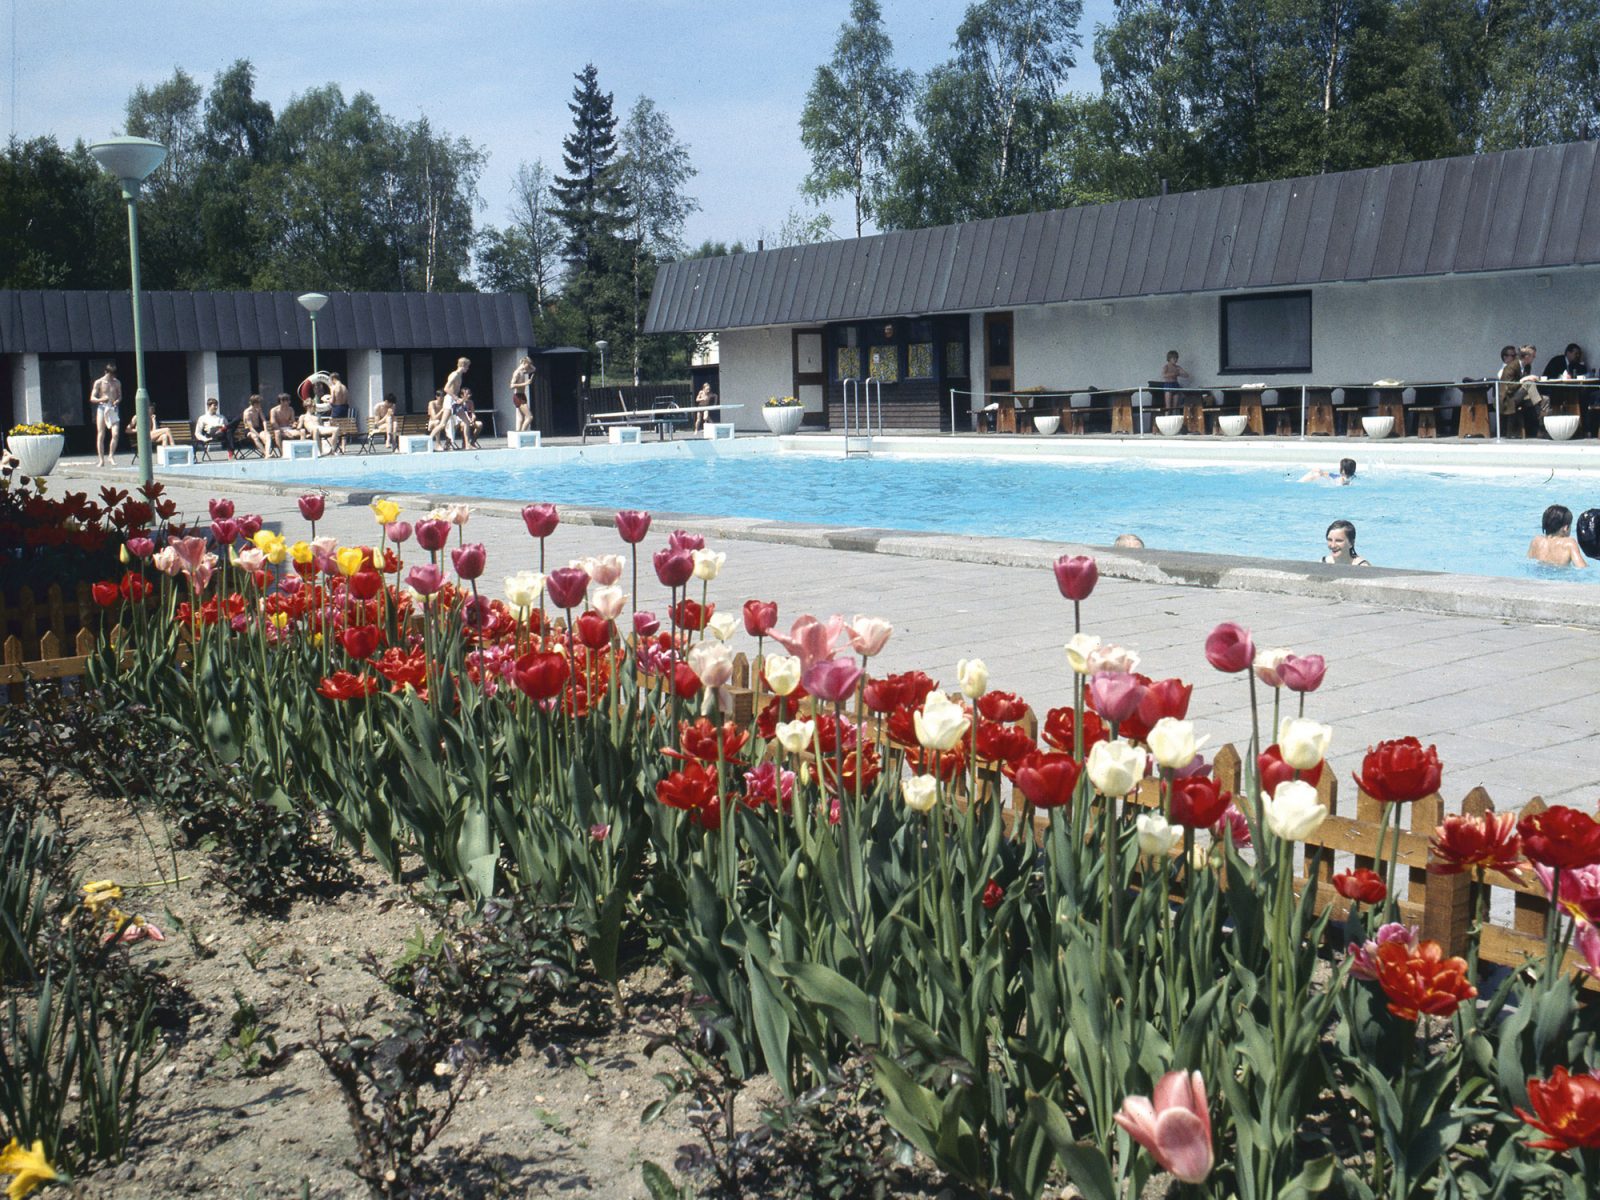 Swimming pool with bathing children and adults, red and white tulips in the foreground.